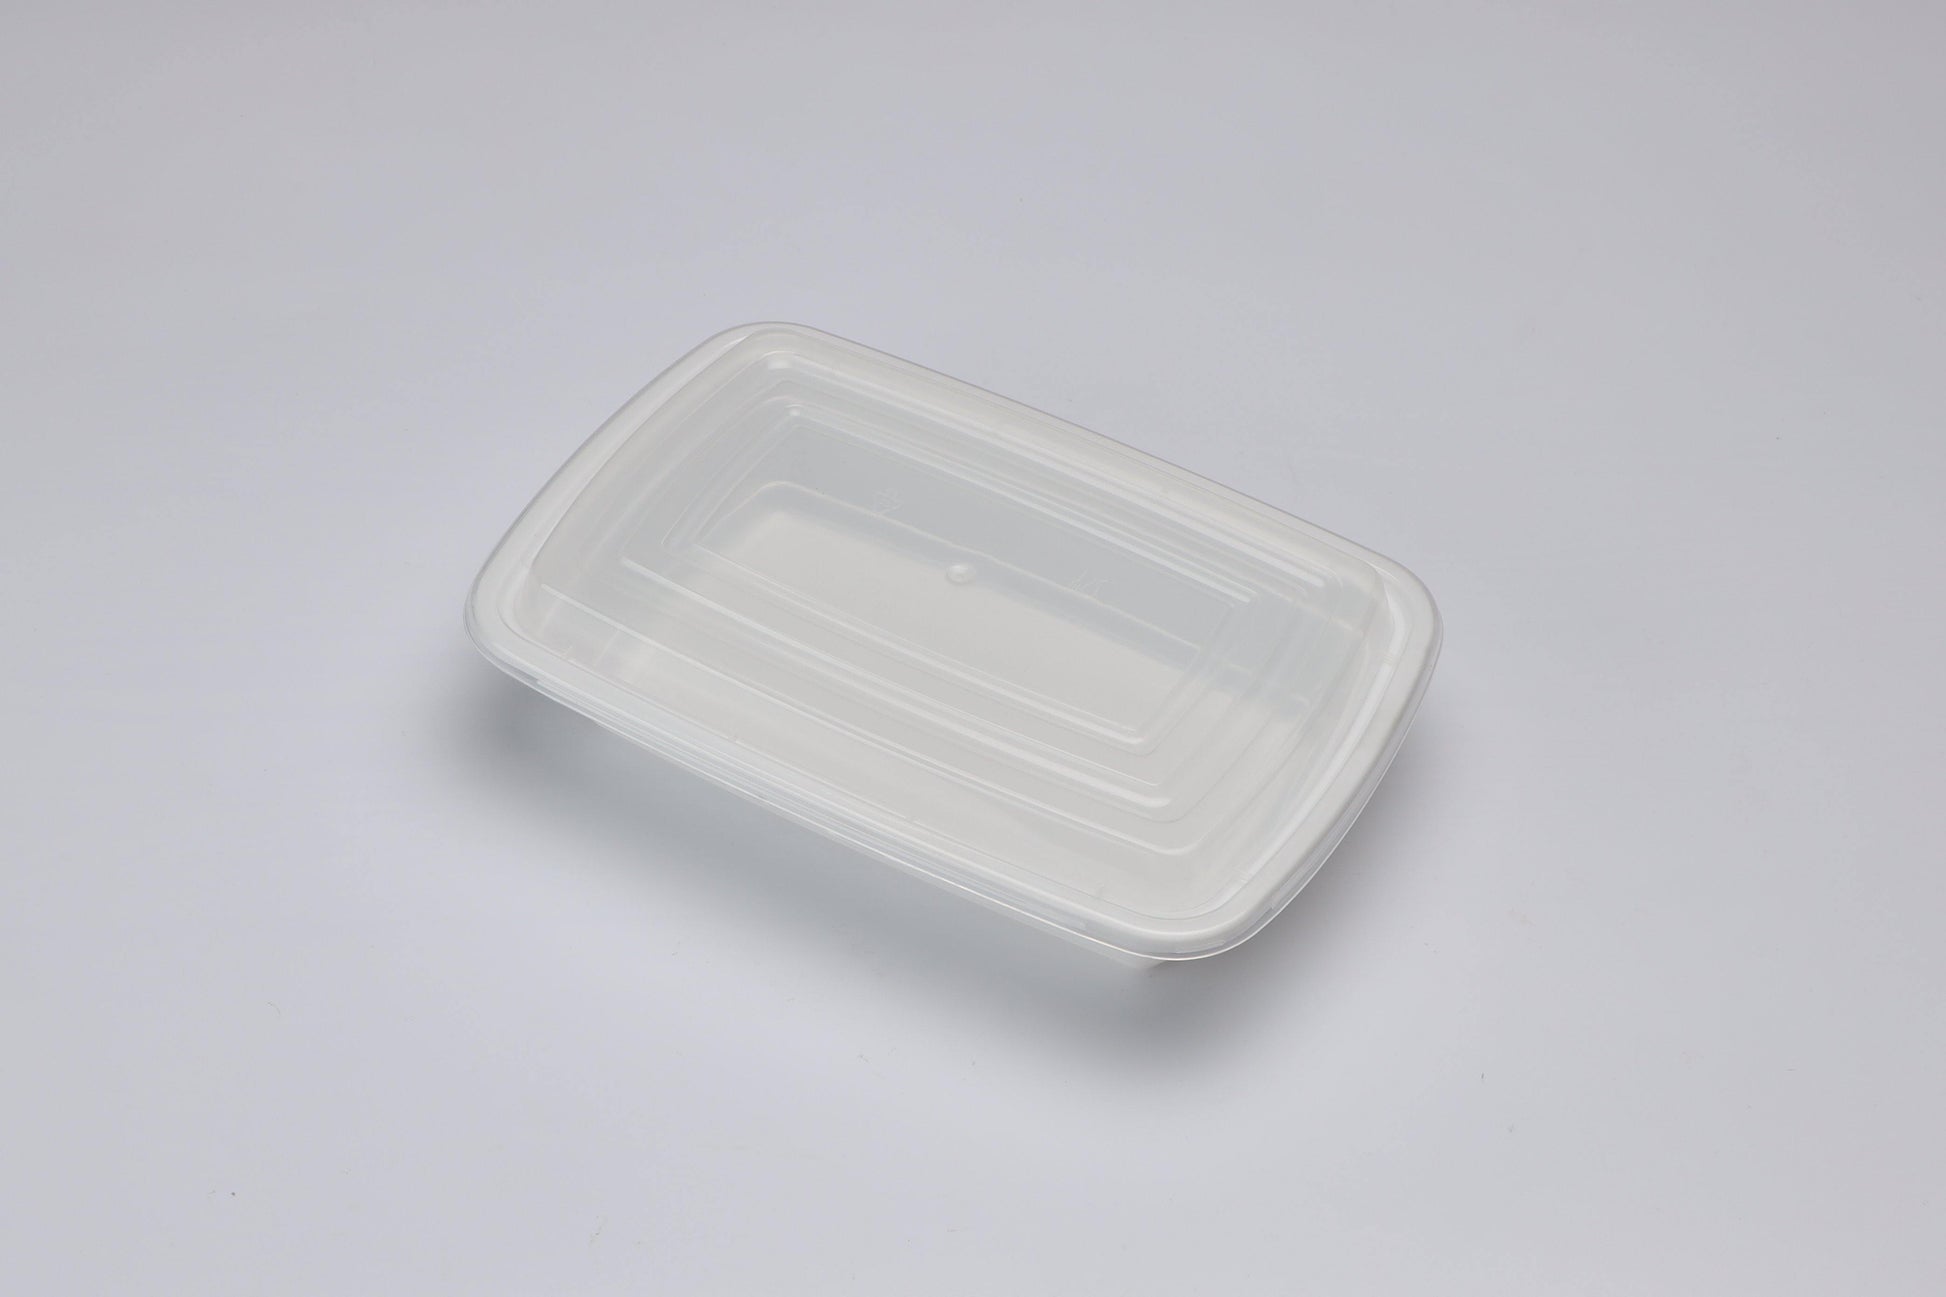 28 oz Plastic to Go Containers with Lids Black 150 Set